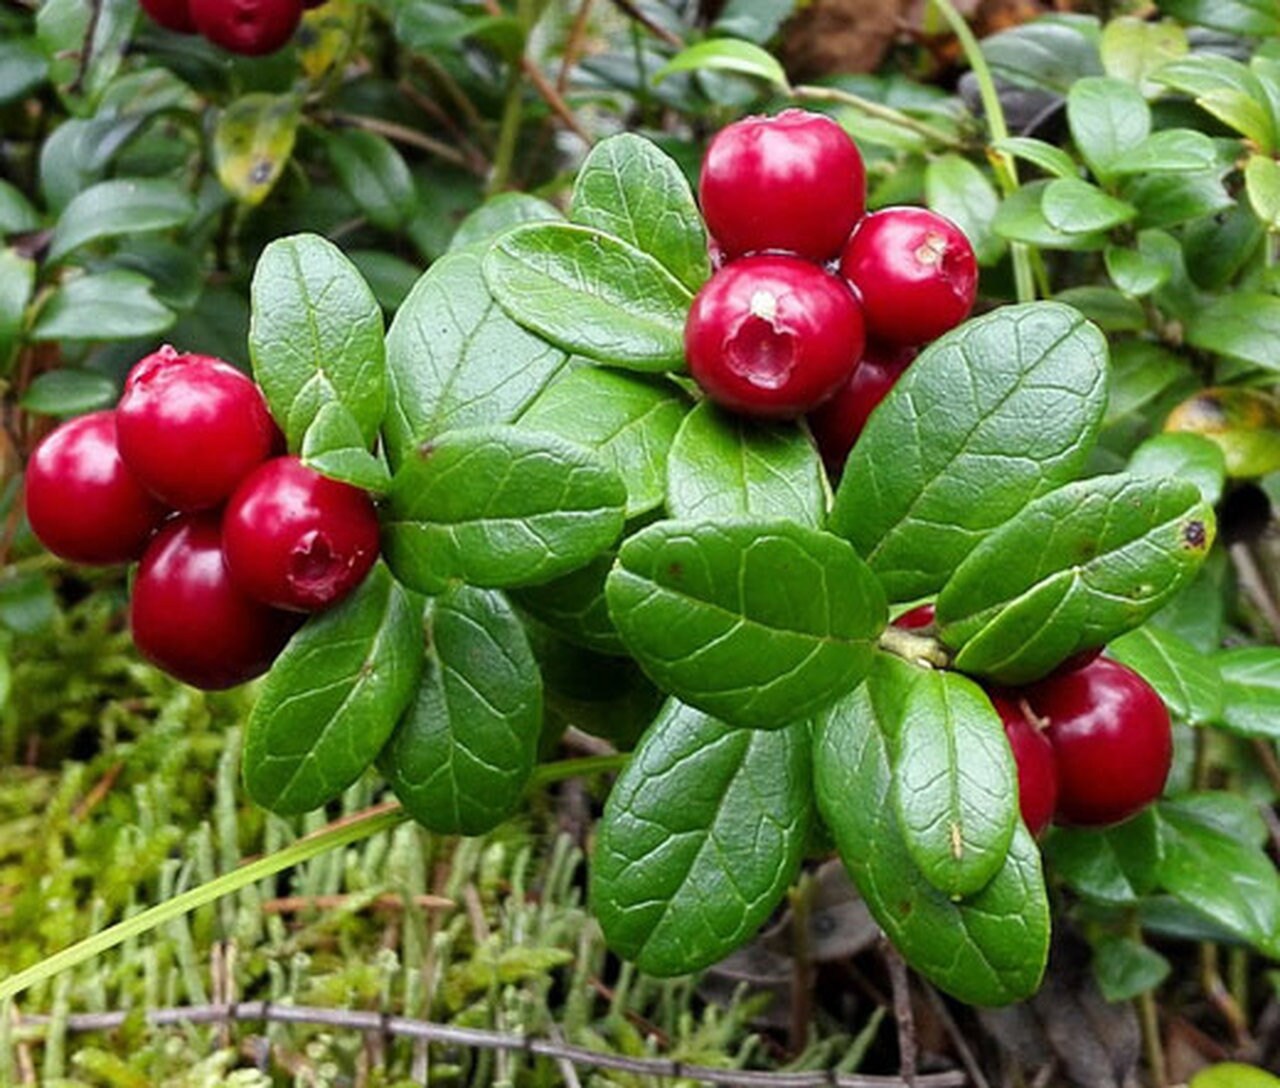 Lingonberry, 'Red Candy' (Vaccinium vitis-idaea 'Red Candy')